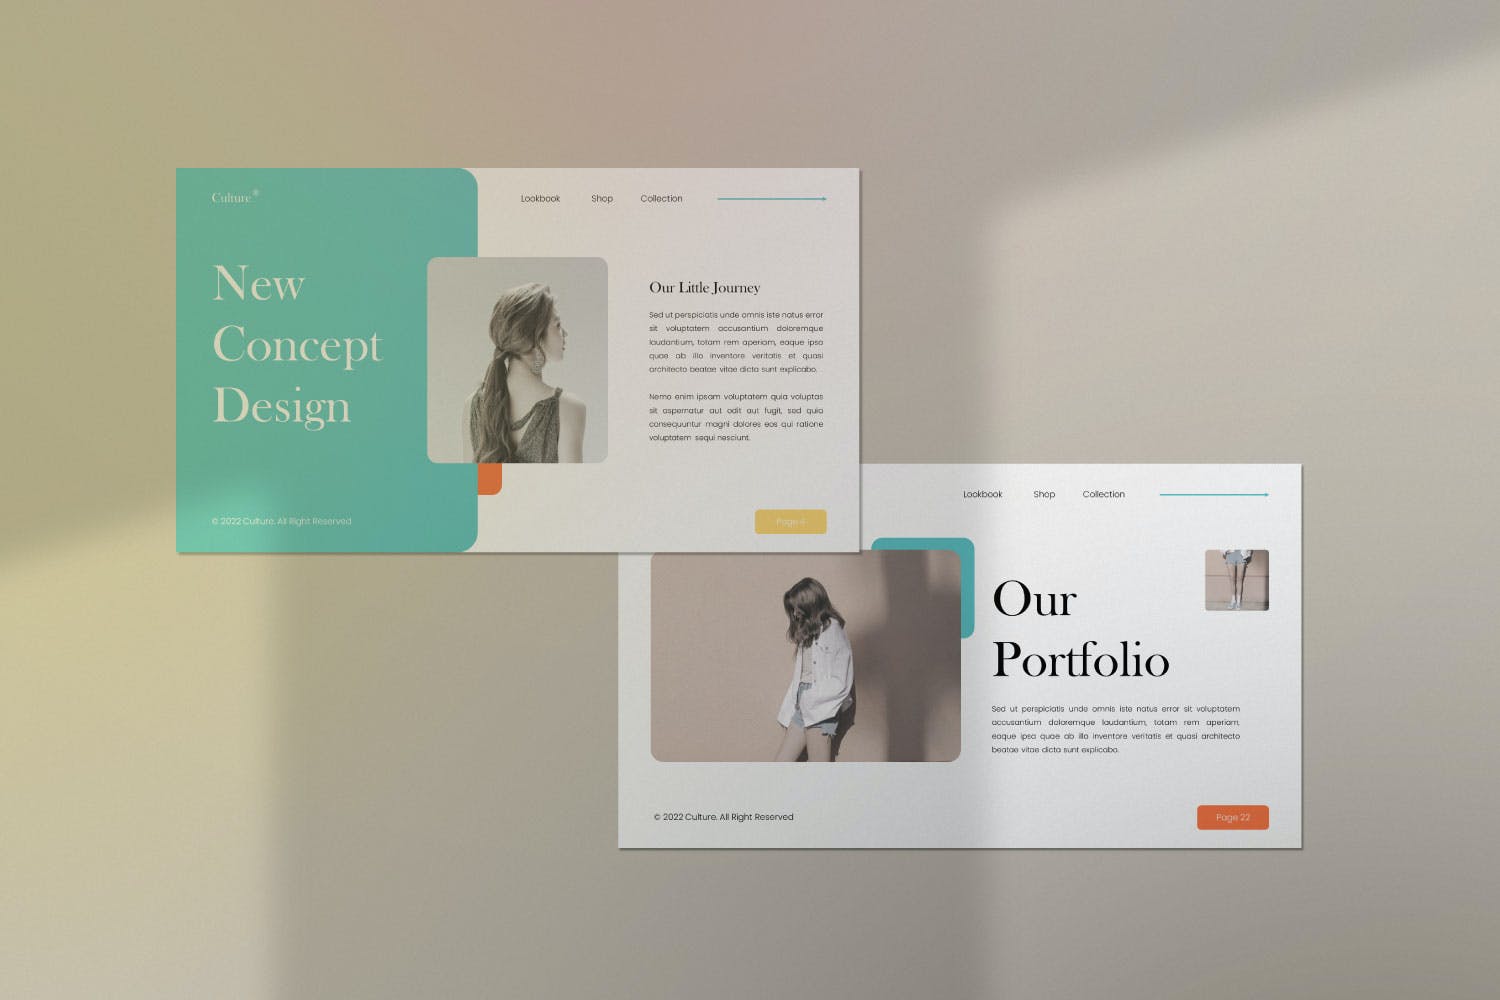 This is a stylish template in a minimal style.